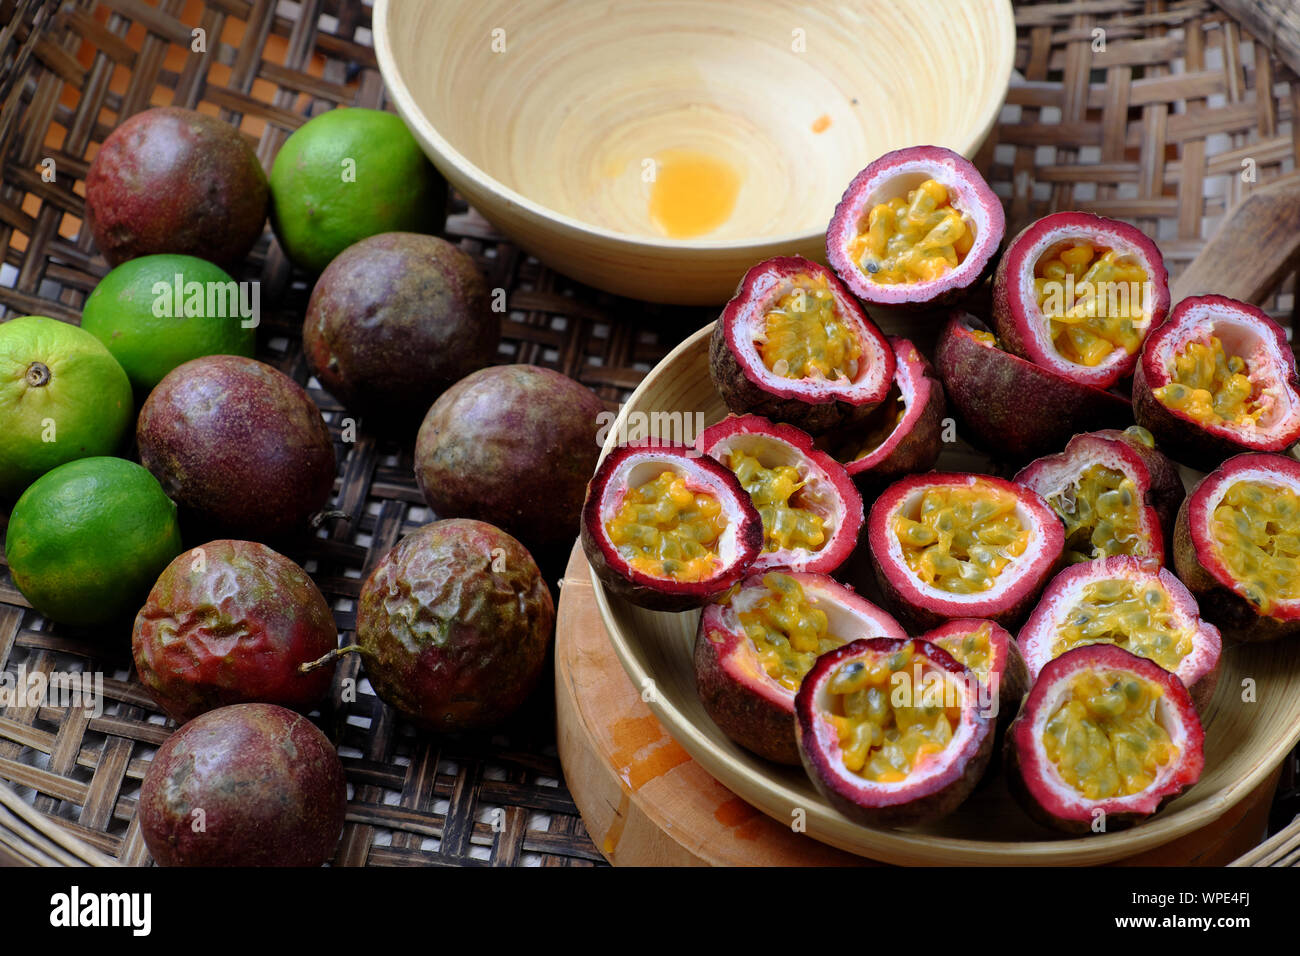 Basket passion fruits and passiflora edulis cut in half, kind of seedy fruit or  with soft pulp and seeds inside hard rind Stock Photo